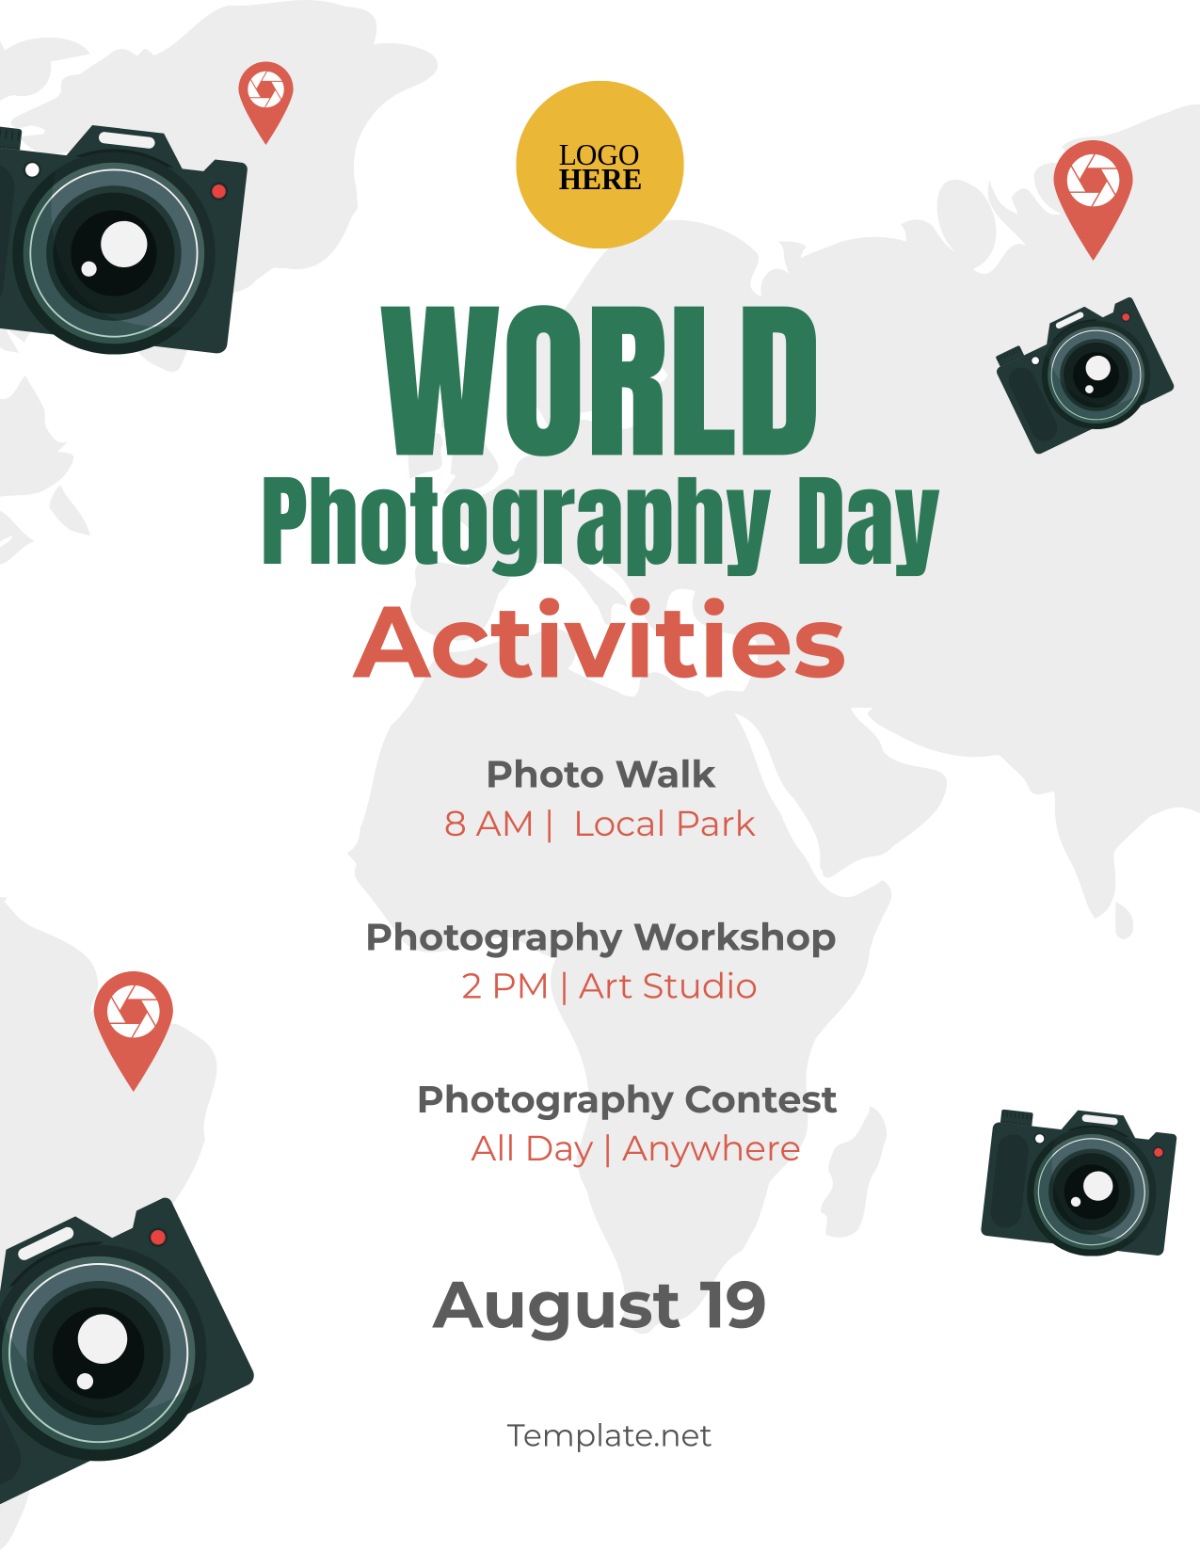 World Photography Day Activities